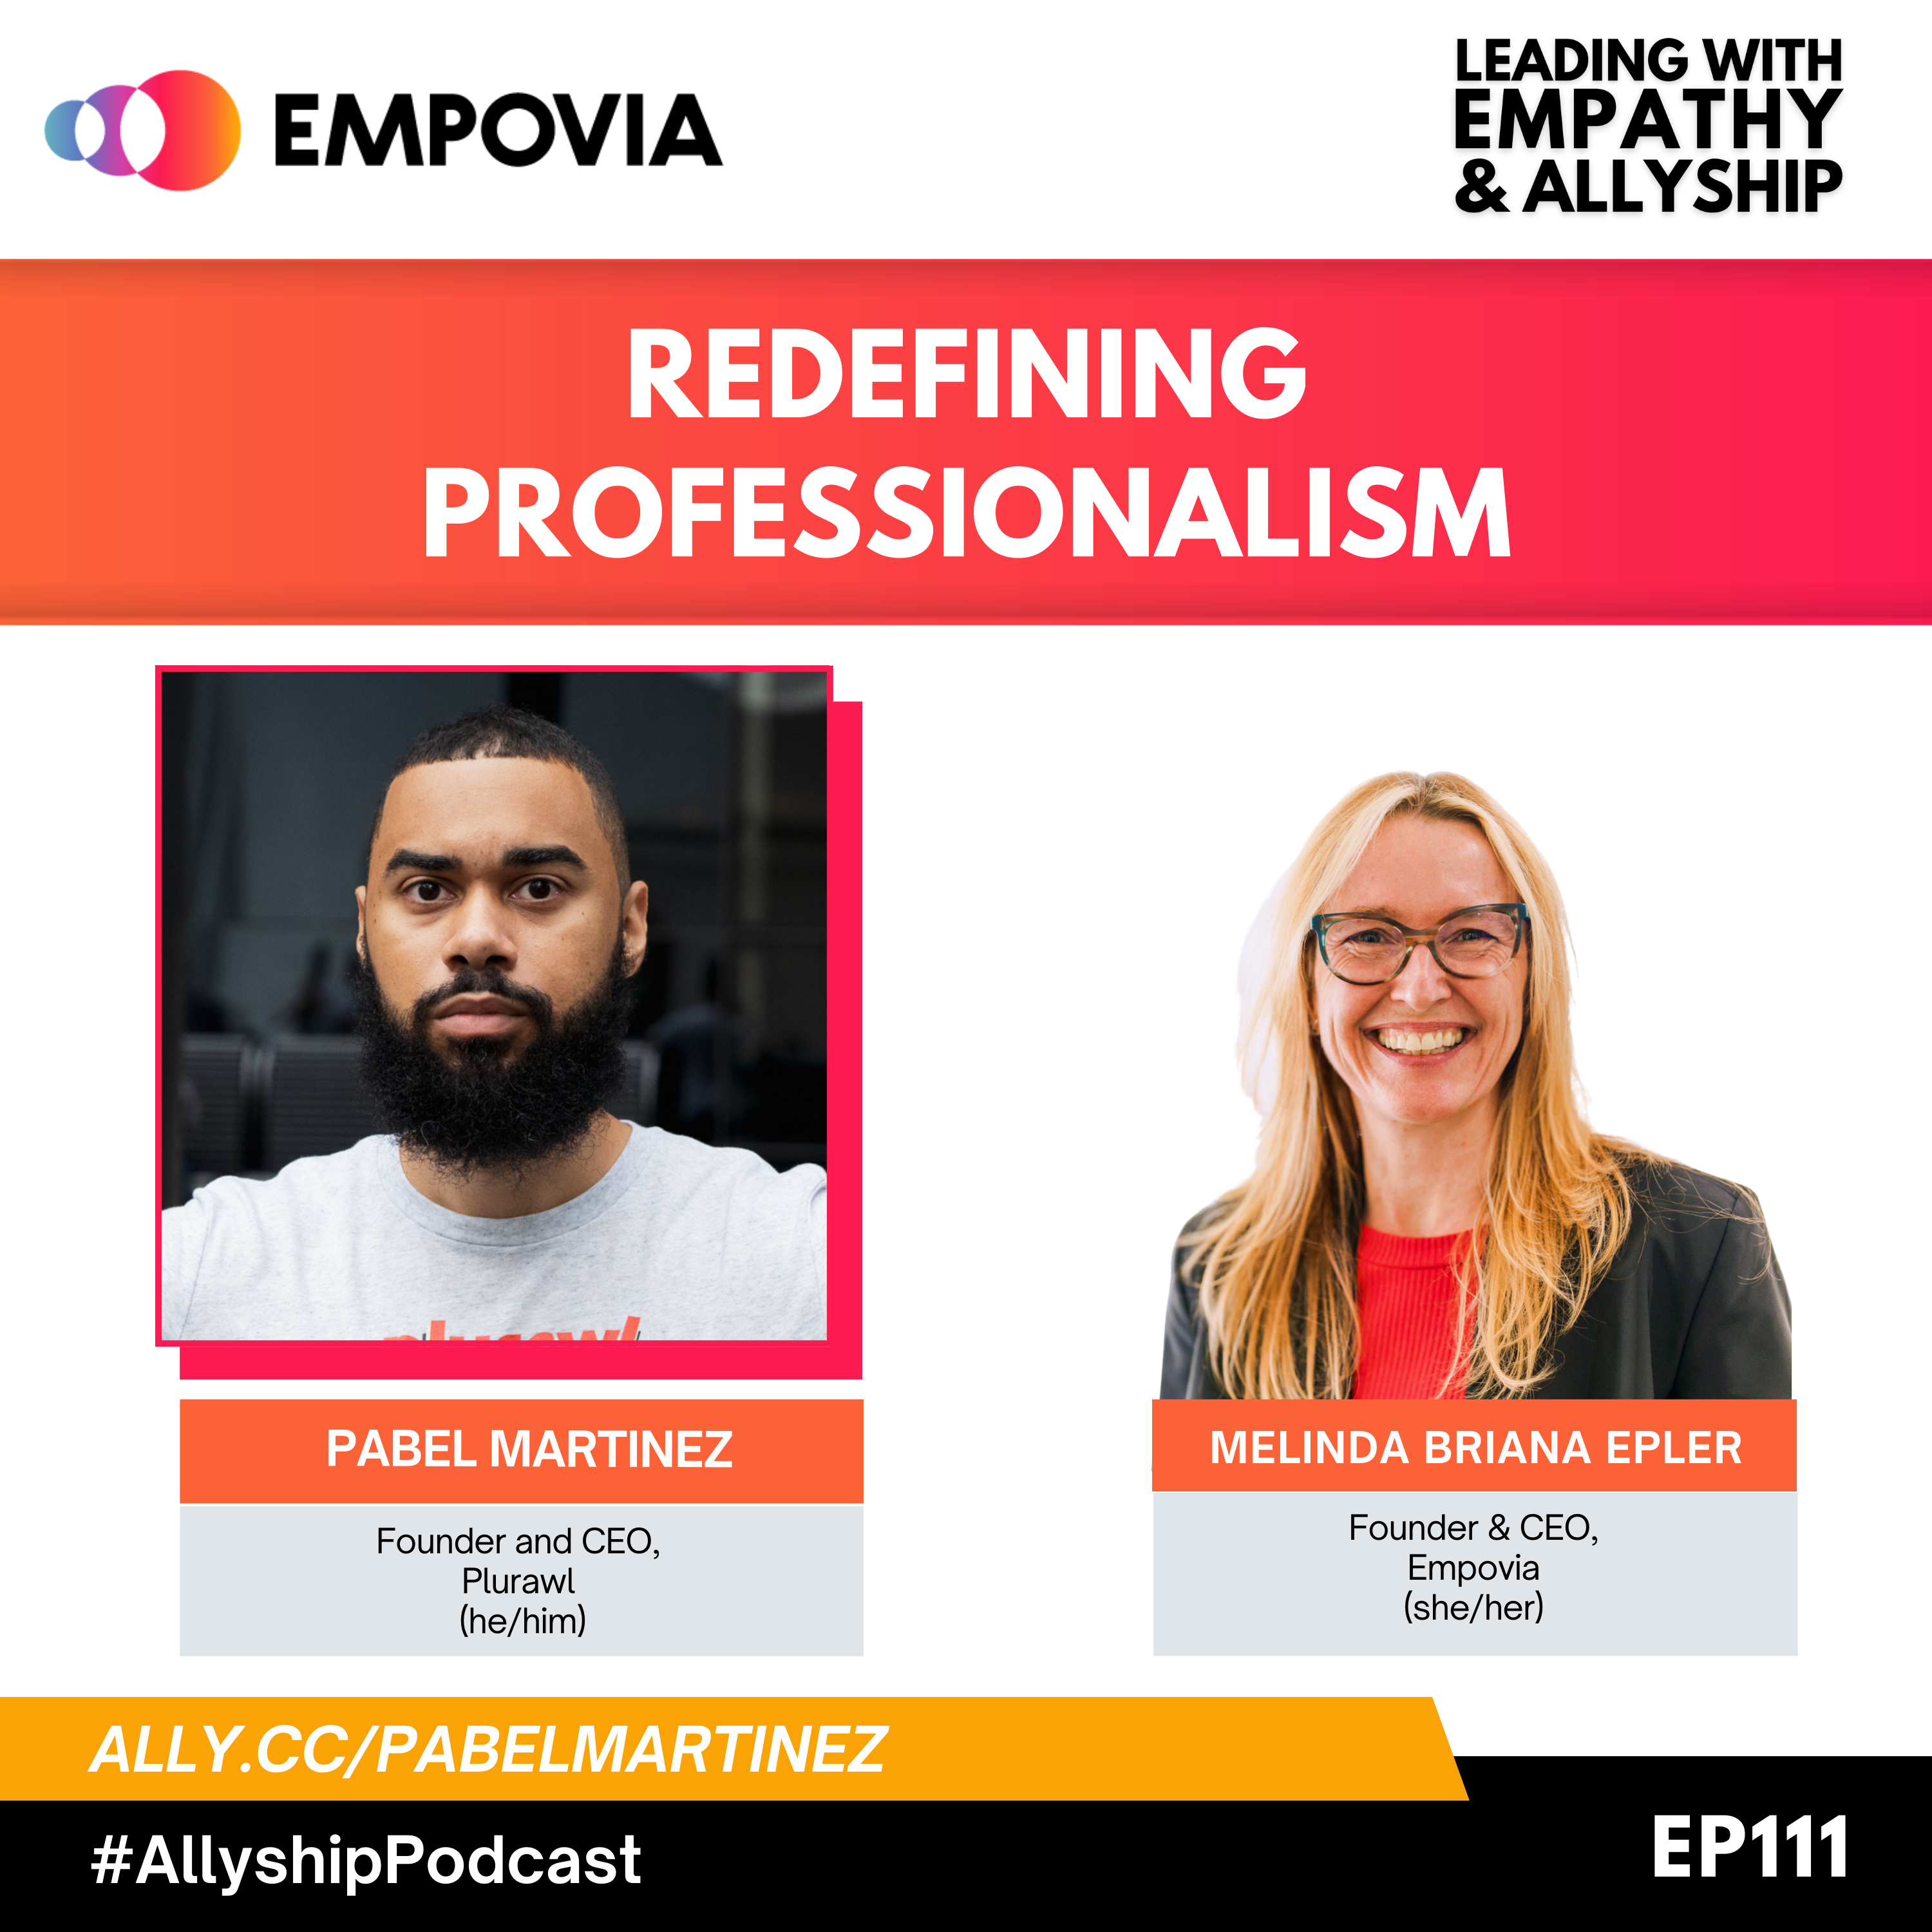 Leading With Empathy & Allyship promo and photos of Pabel Martinez, an Afro-Latino with a low black haircut, thick black facial hair, and grey crew neck t-shirt with the word “plurawl” printed in bright orange, and host Melinda Briana Epler, a White woman with blonde and red hair, glasses, red shirt, and black jacket.